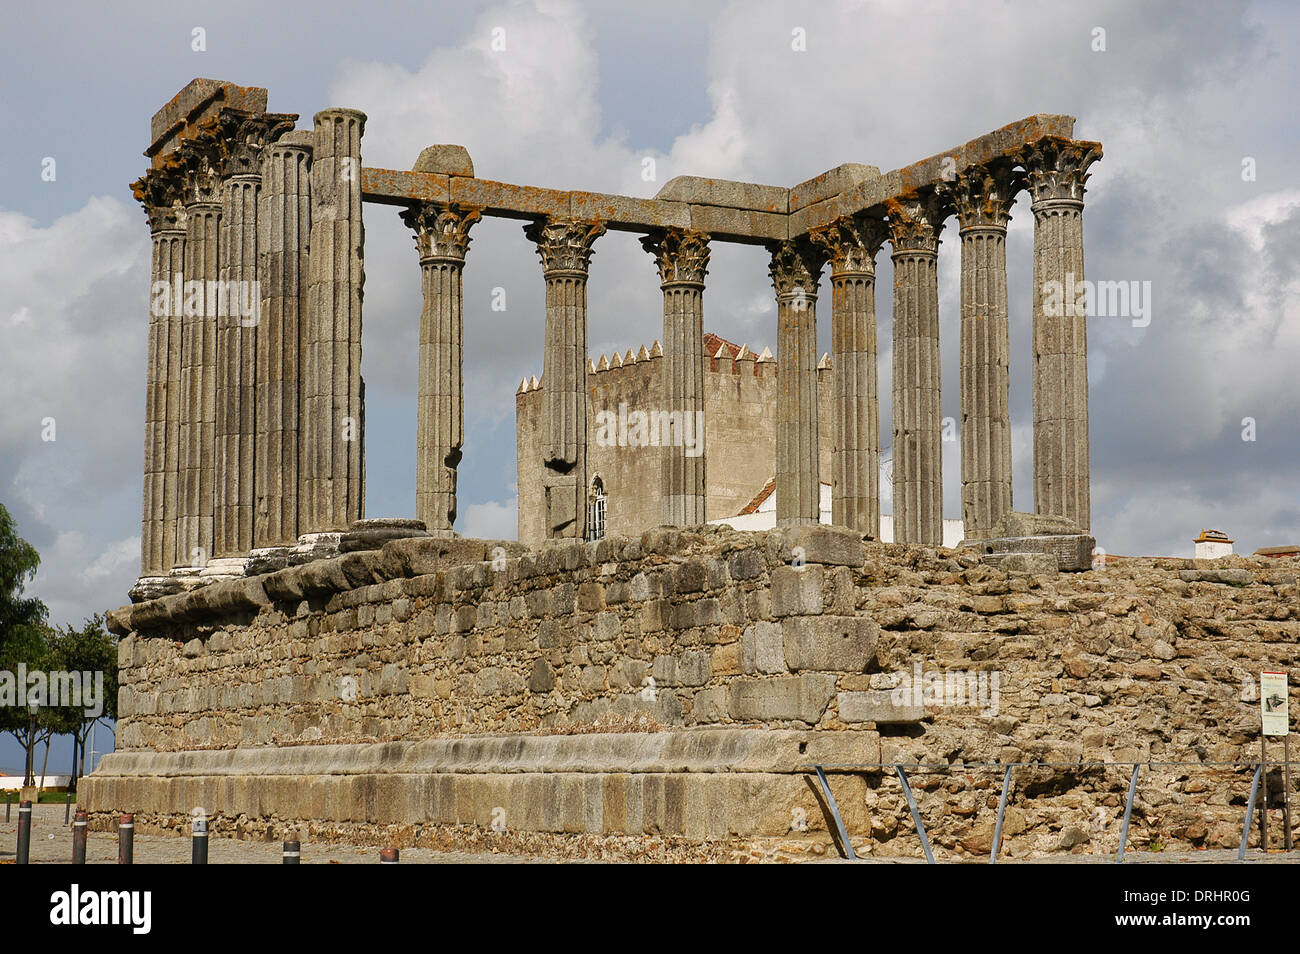 Portugal. Roman Temple of Evora. 1st century. Probably dedicated to the cult of Emperor Augustus. Corinthian style. Stock Photo